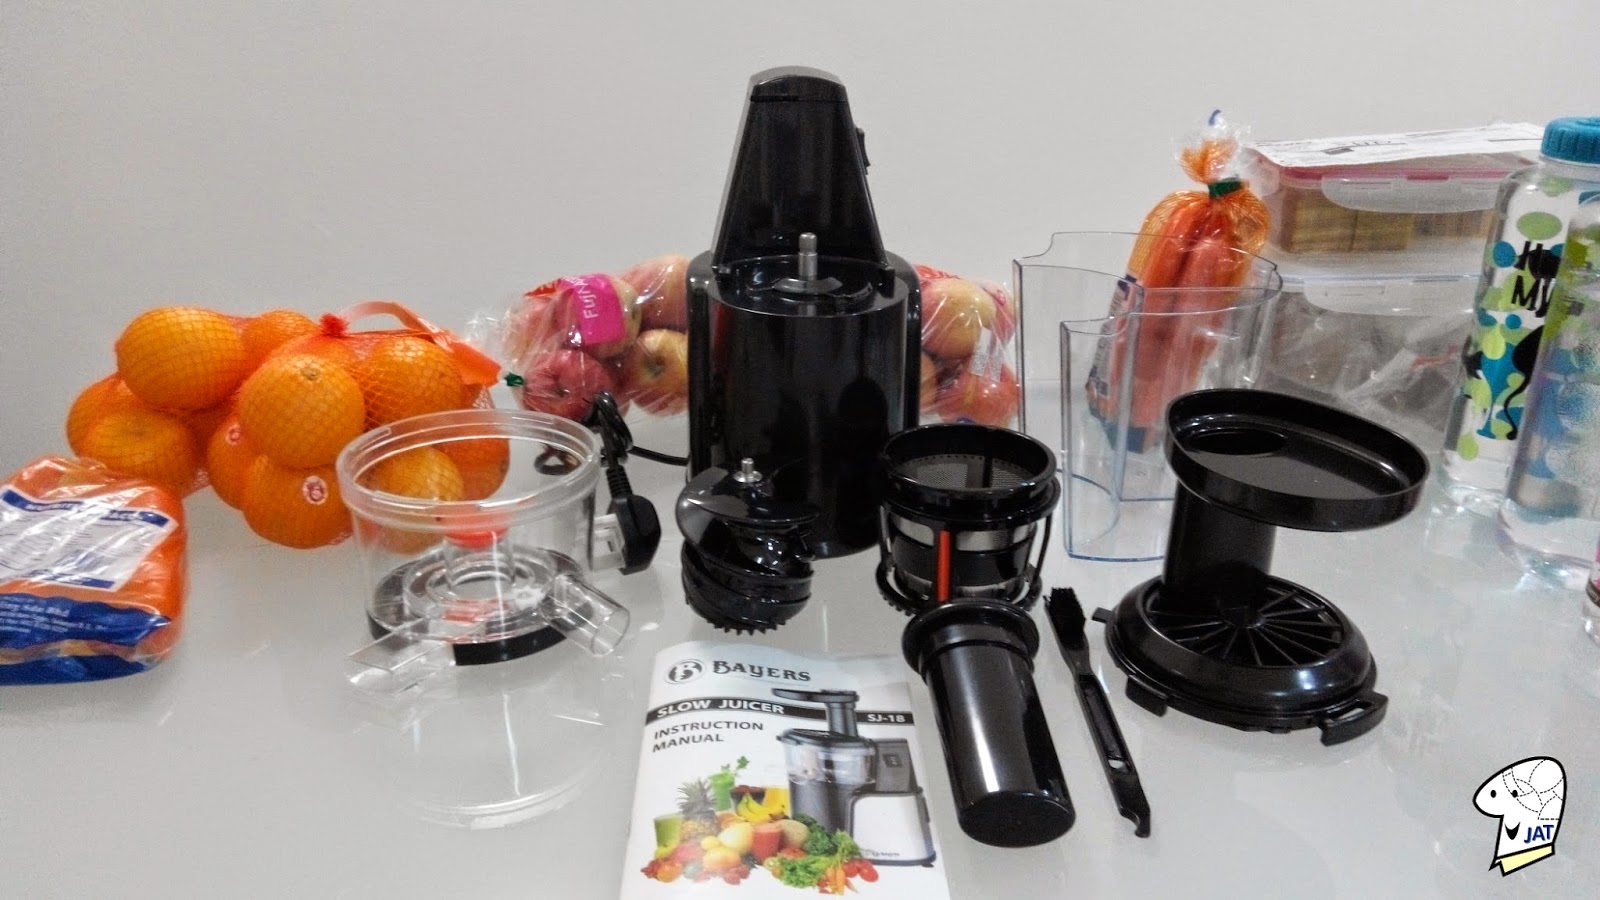 Bayers Dual Stage Slow Juicer, dissembled 